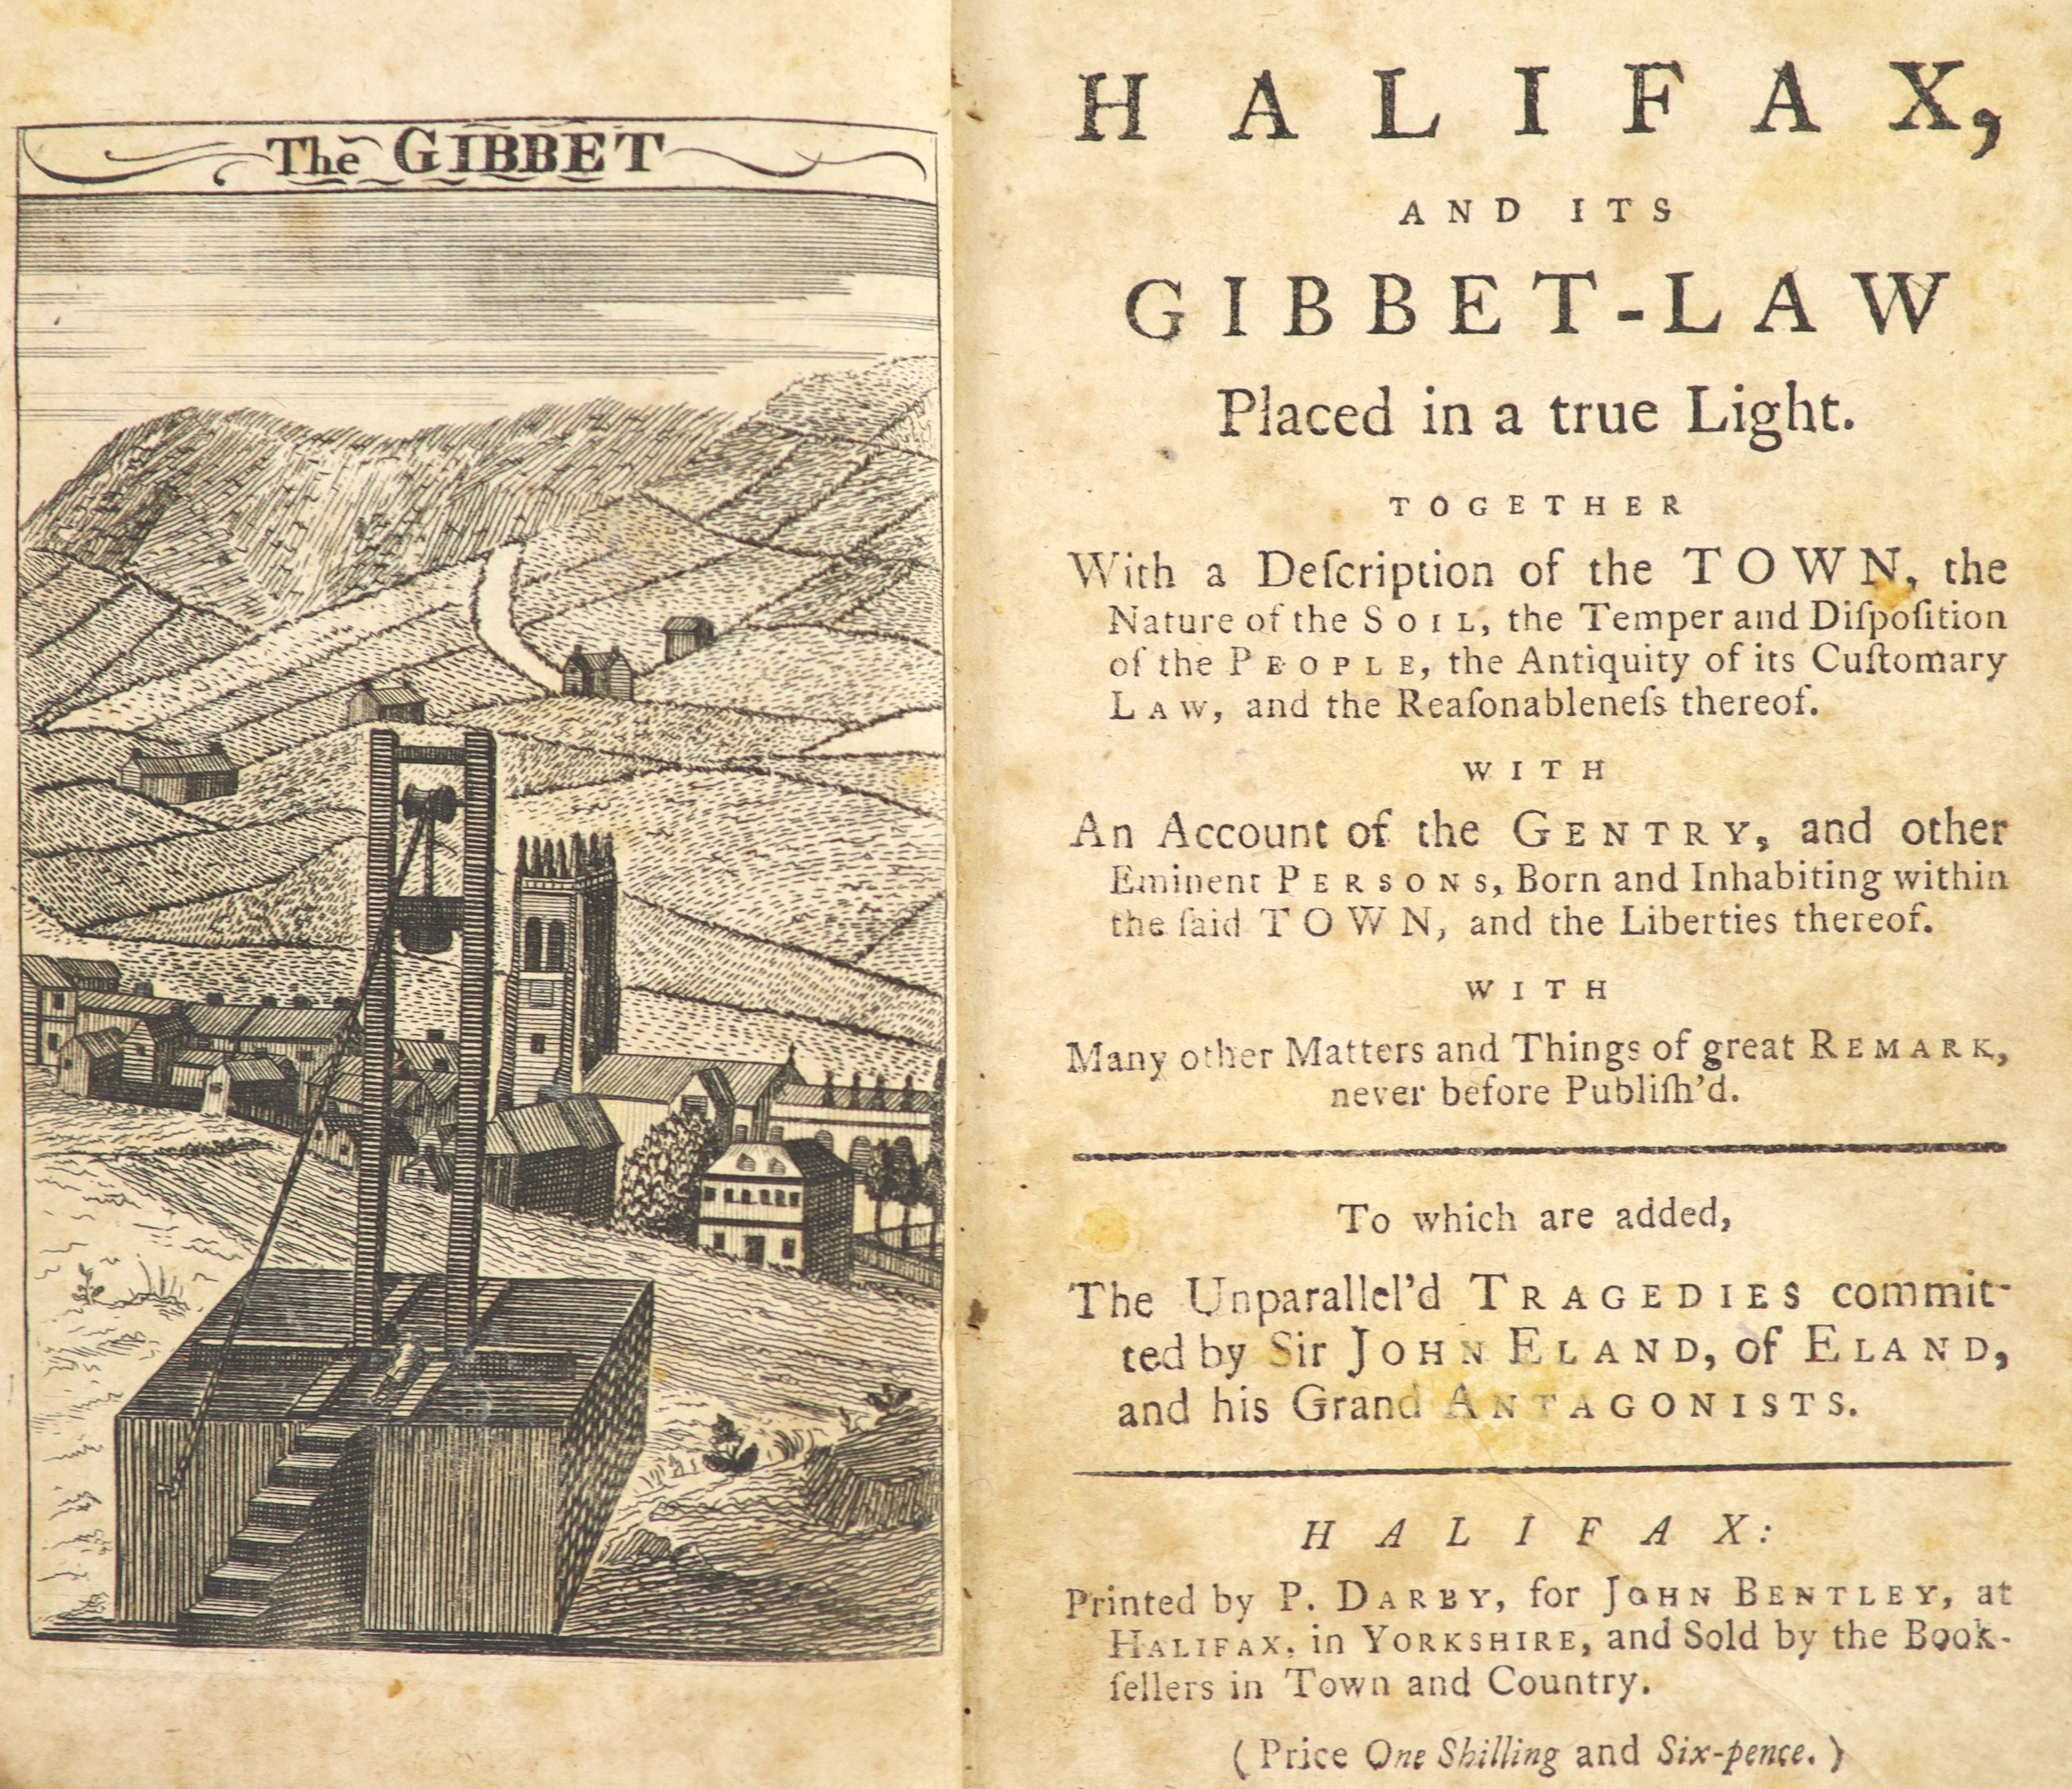 Bentley, John. Halifax, and its Gibbet-Law placed in a true light ...